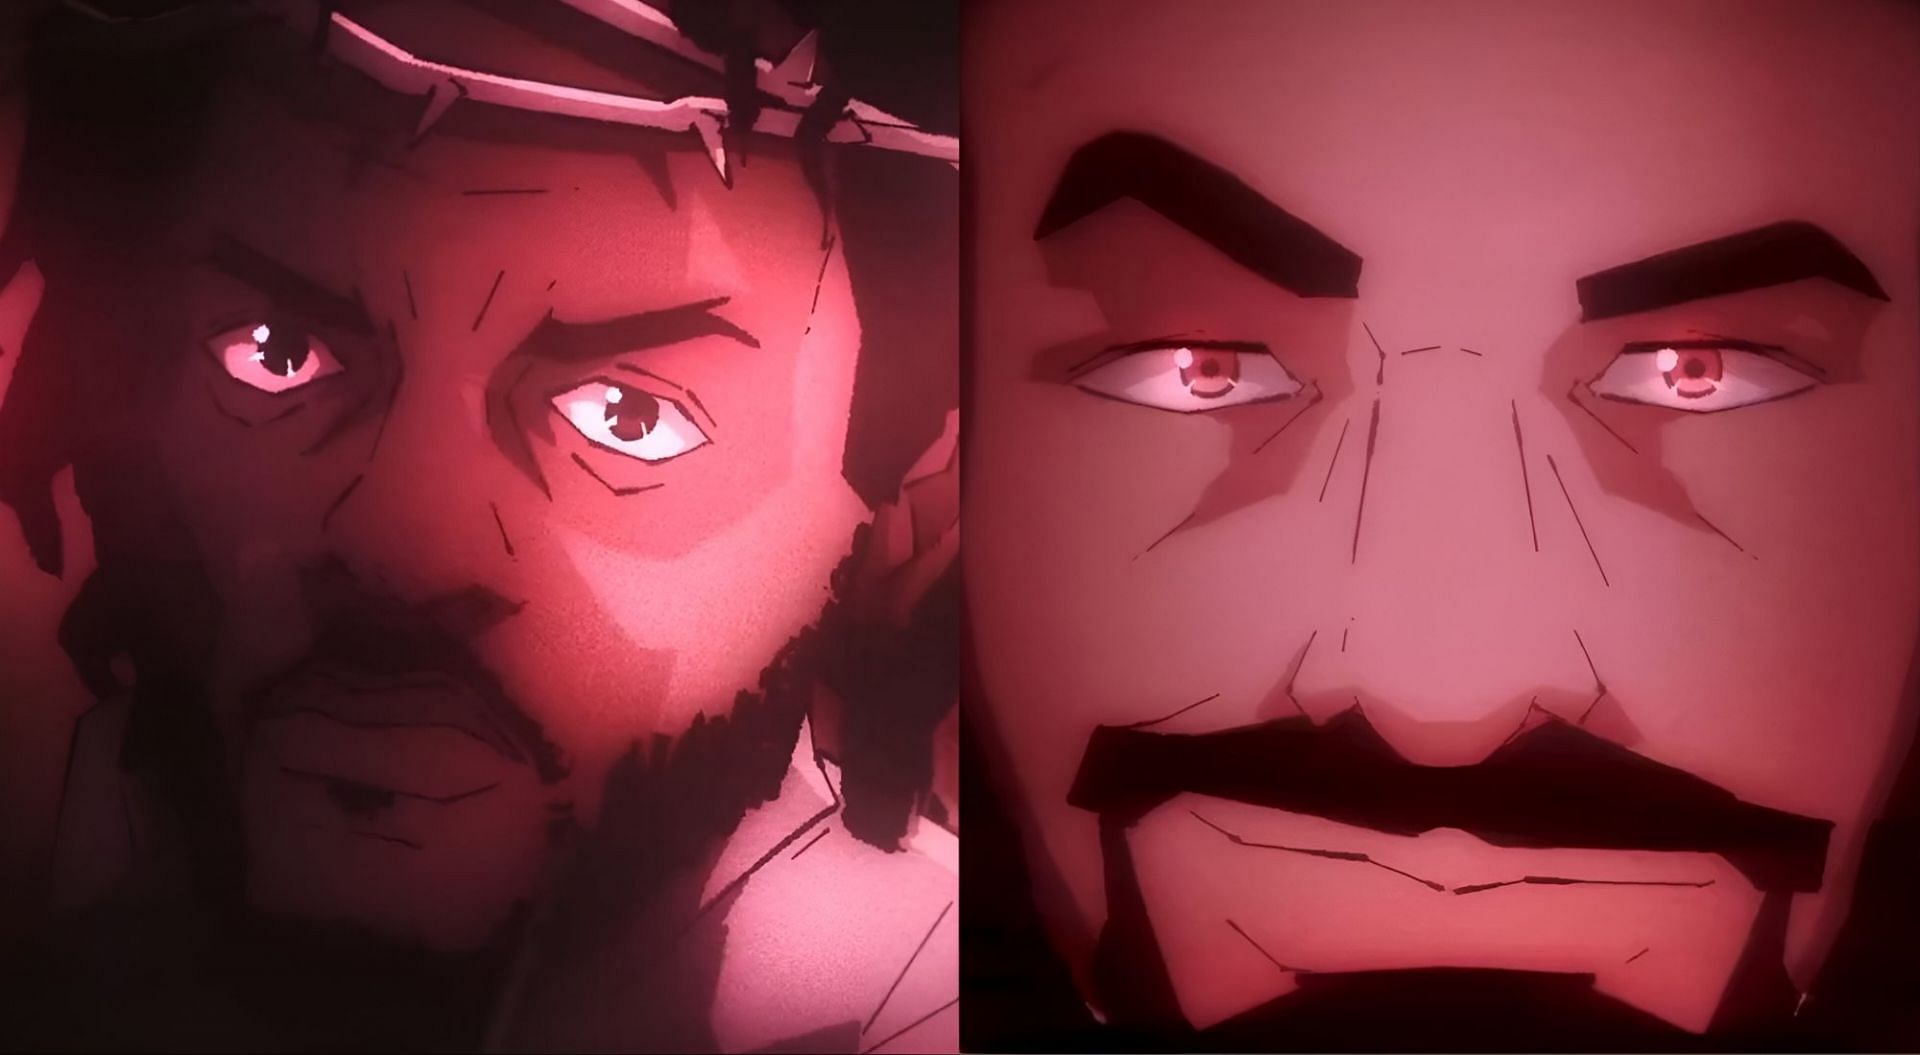 Fans react to Kendrick-Drake anime video references to their ongoing rap battle (Images via champagnepapi/Instagram and Kendrick Lamar/YouTube)